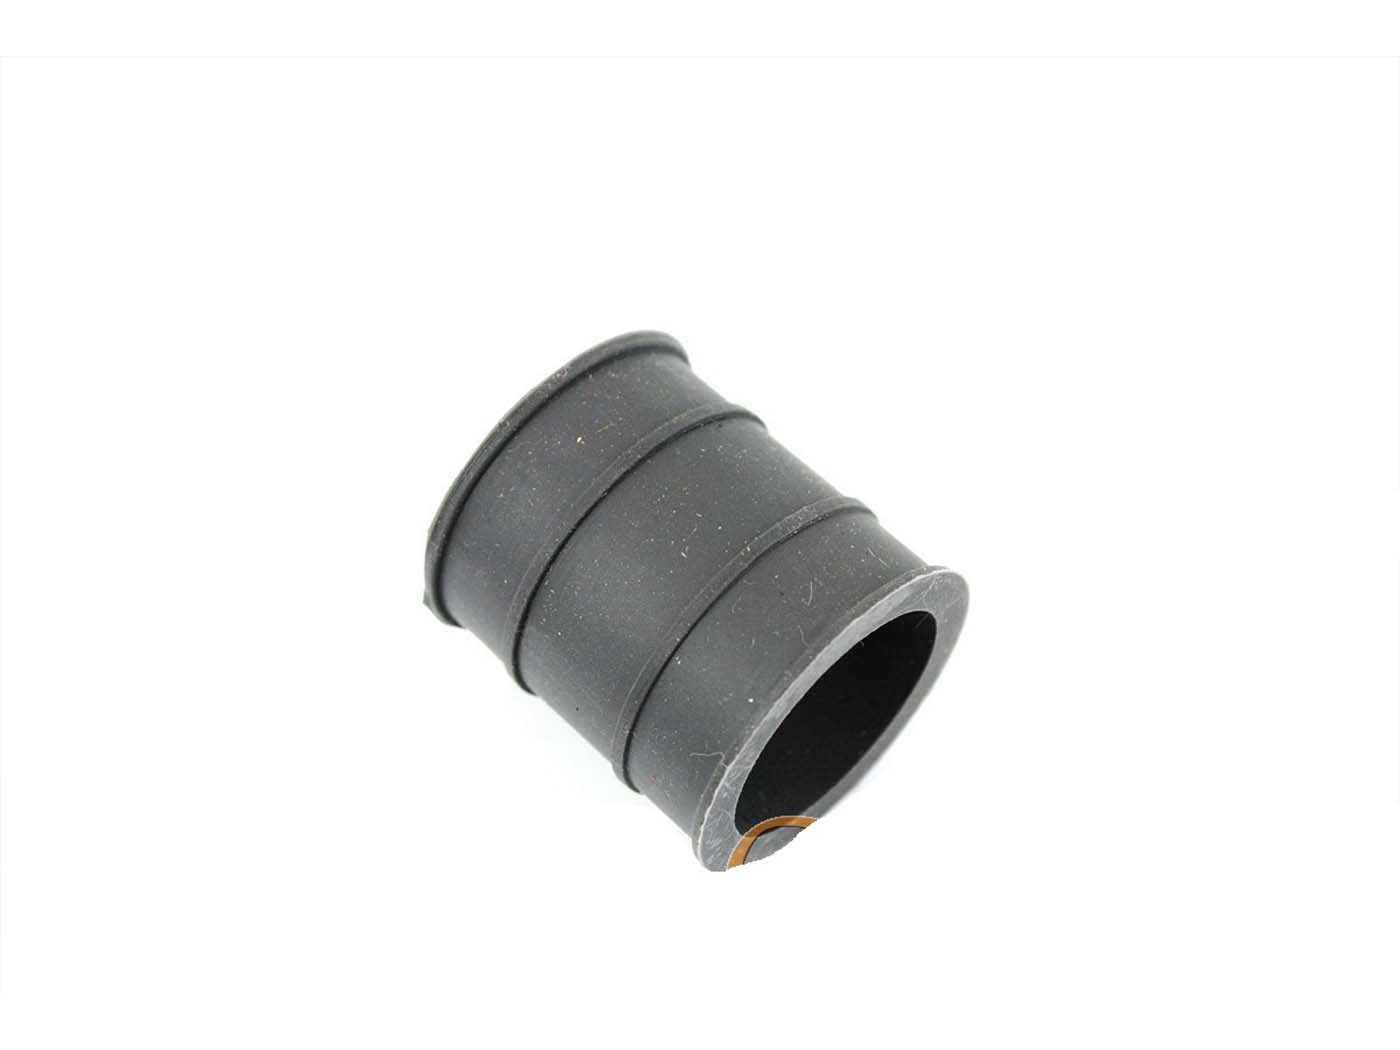 Exhaust Sealing Rubber Connection Both Sides From 30 To 32mm Outer Dimension 35mm Length 40mm For Zündapp, Kreidler, Hercules, Puch, Miele, DKW, Rixe, KTM, Moped, Moped, Mokick, Scooter